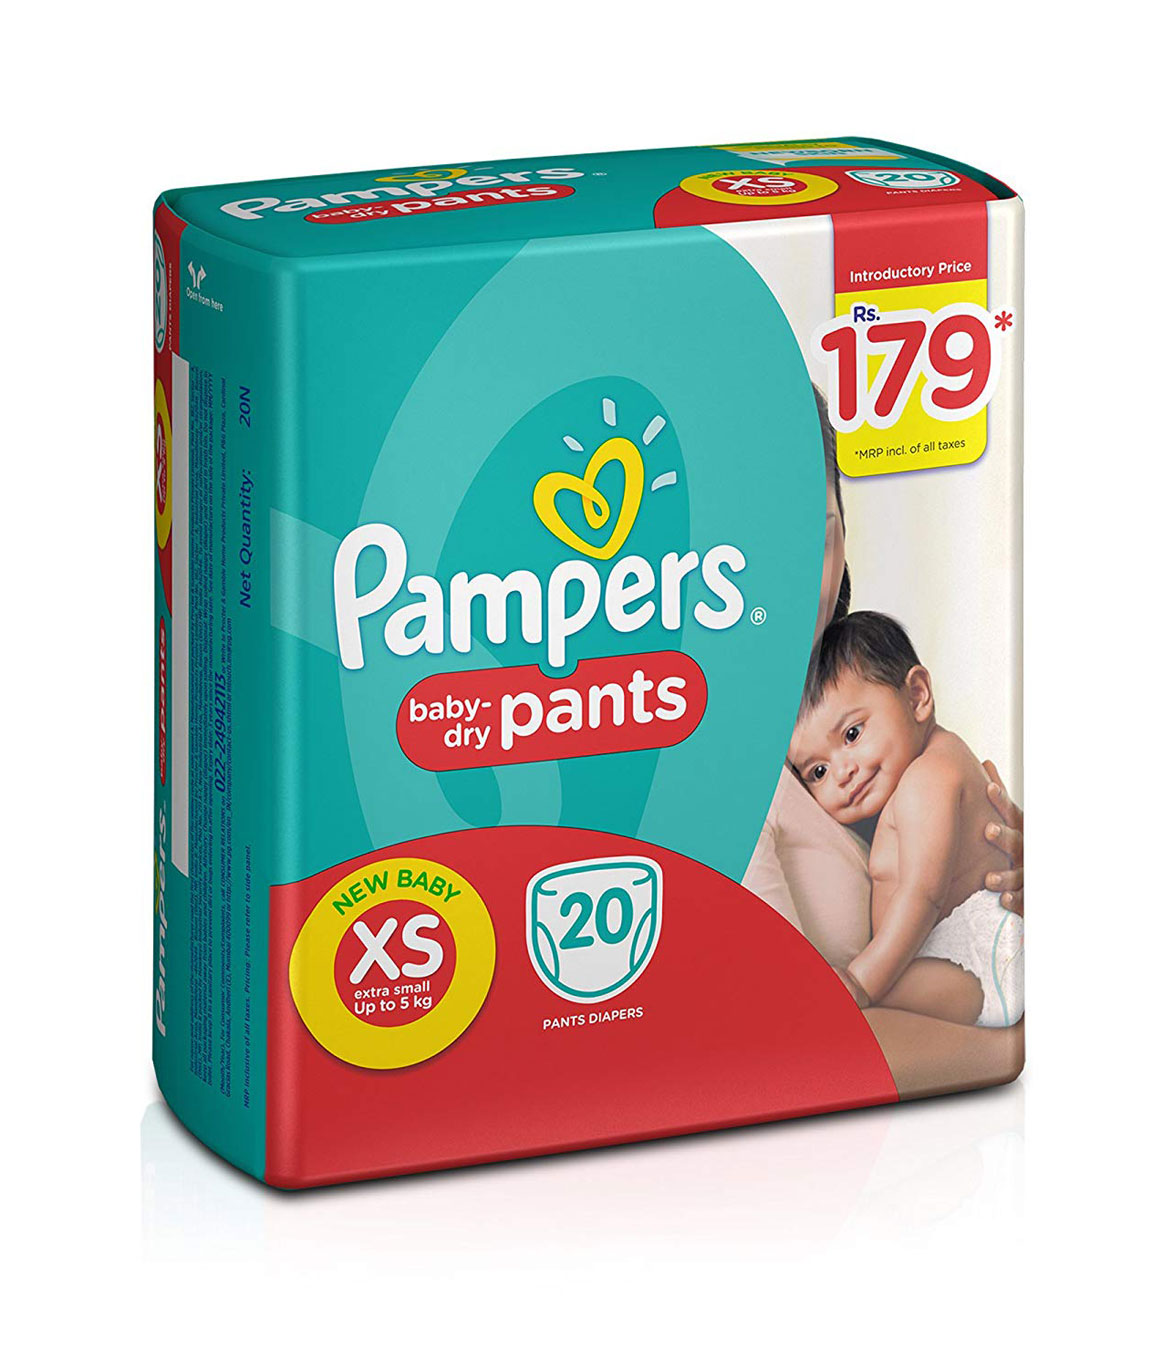 Pampers Pants Extra Small Size Diapers for New Born (20 Count)